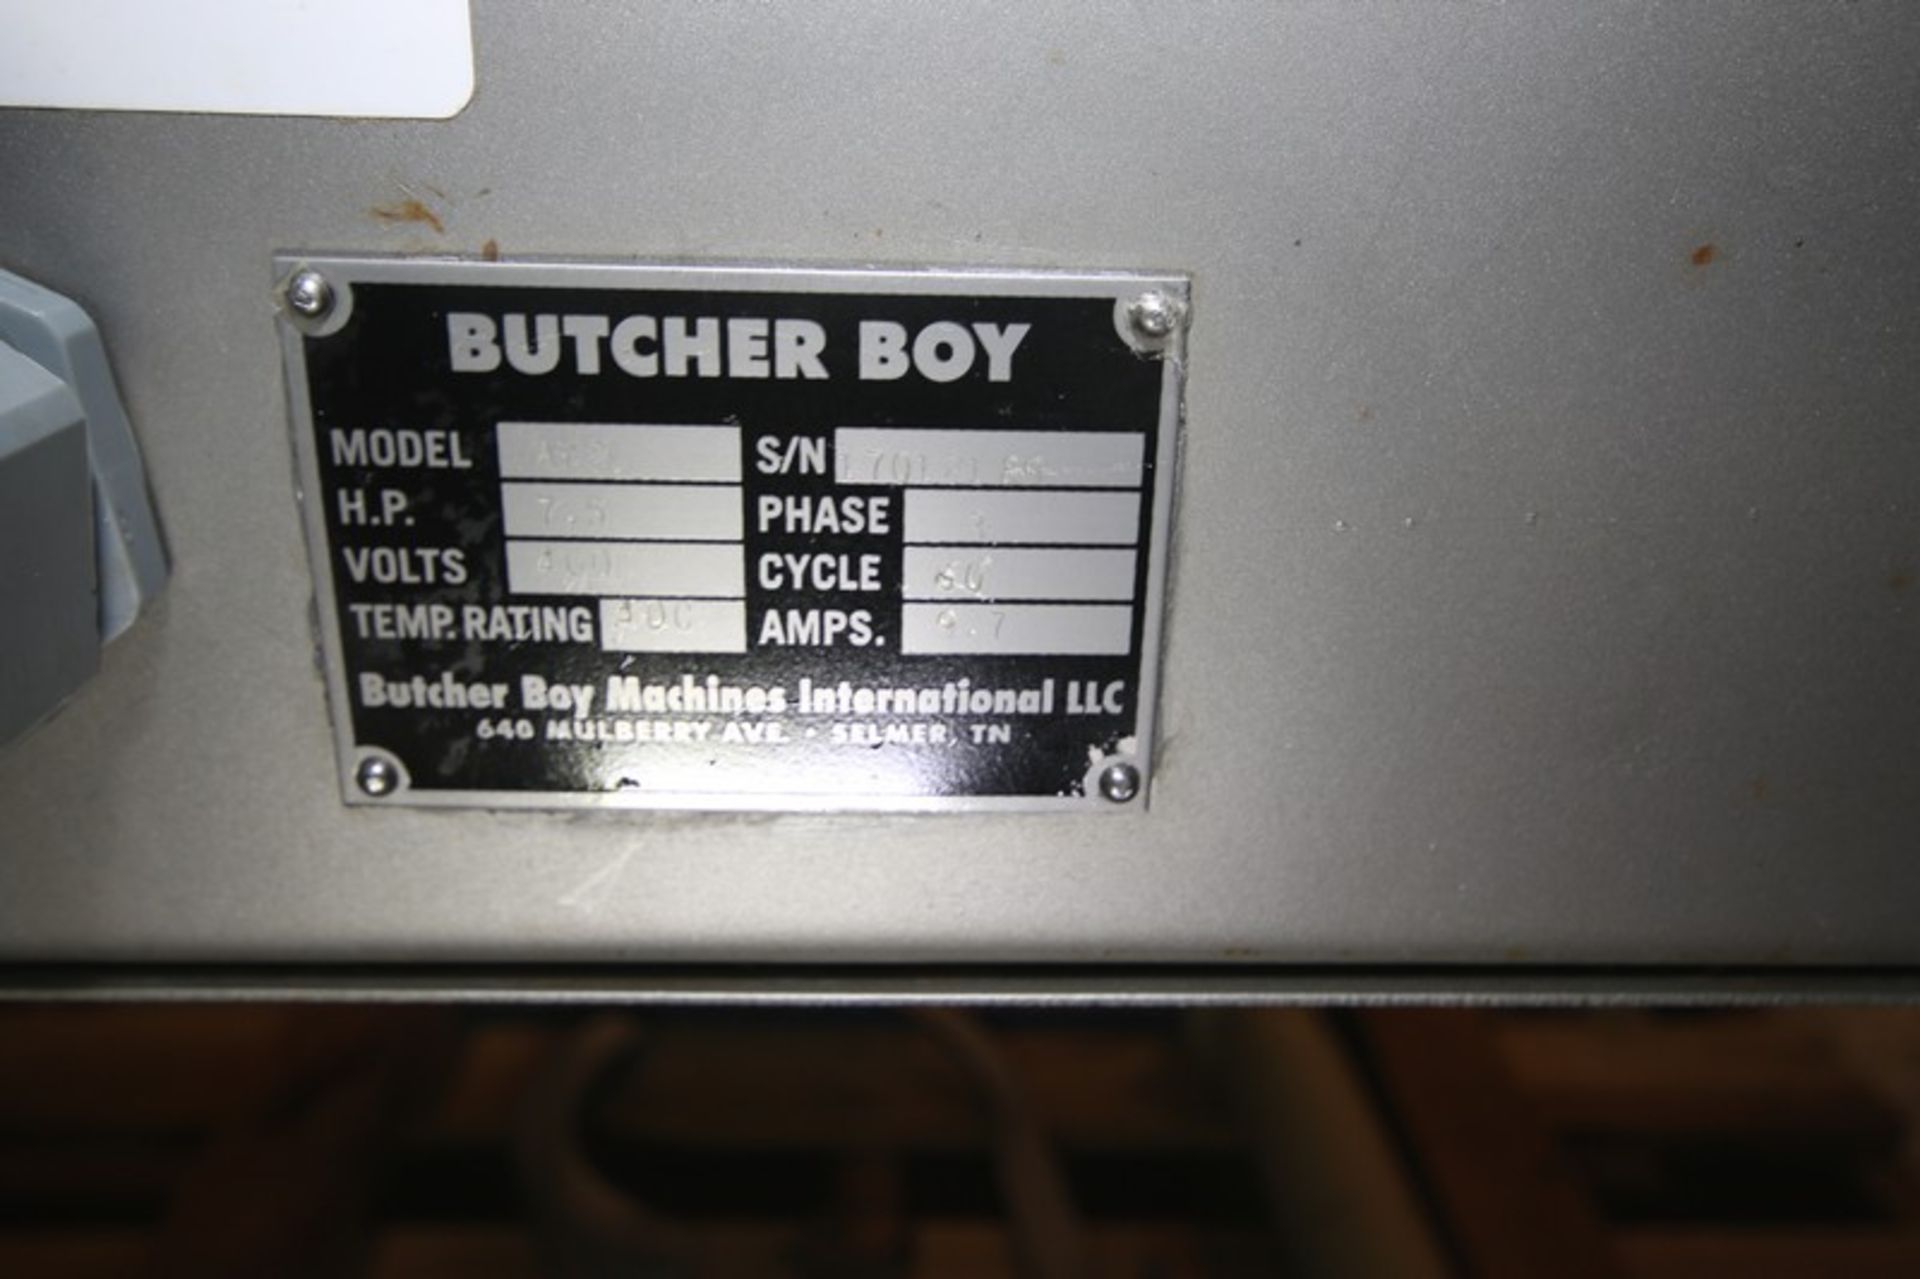 Butcher Boy S/S Floor Grinder, Model A52, SN 17012189, 7.5 hp, 460 V (INV#83499)(Located @ the MDG - Image 7 of 7